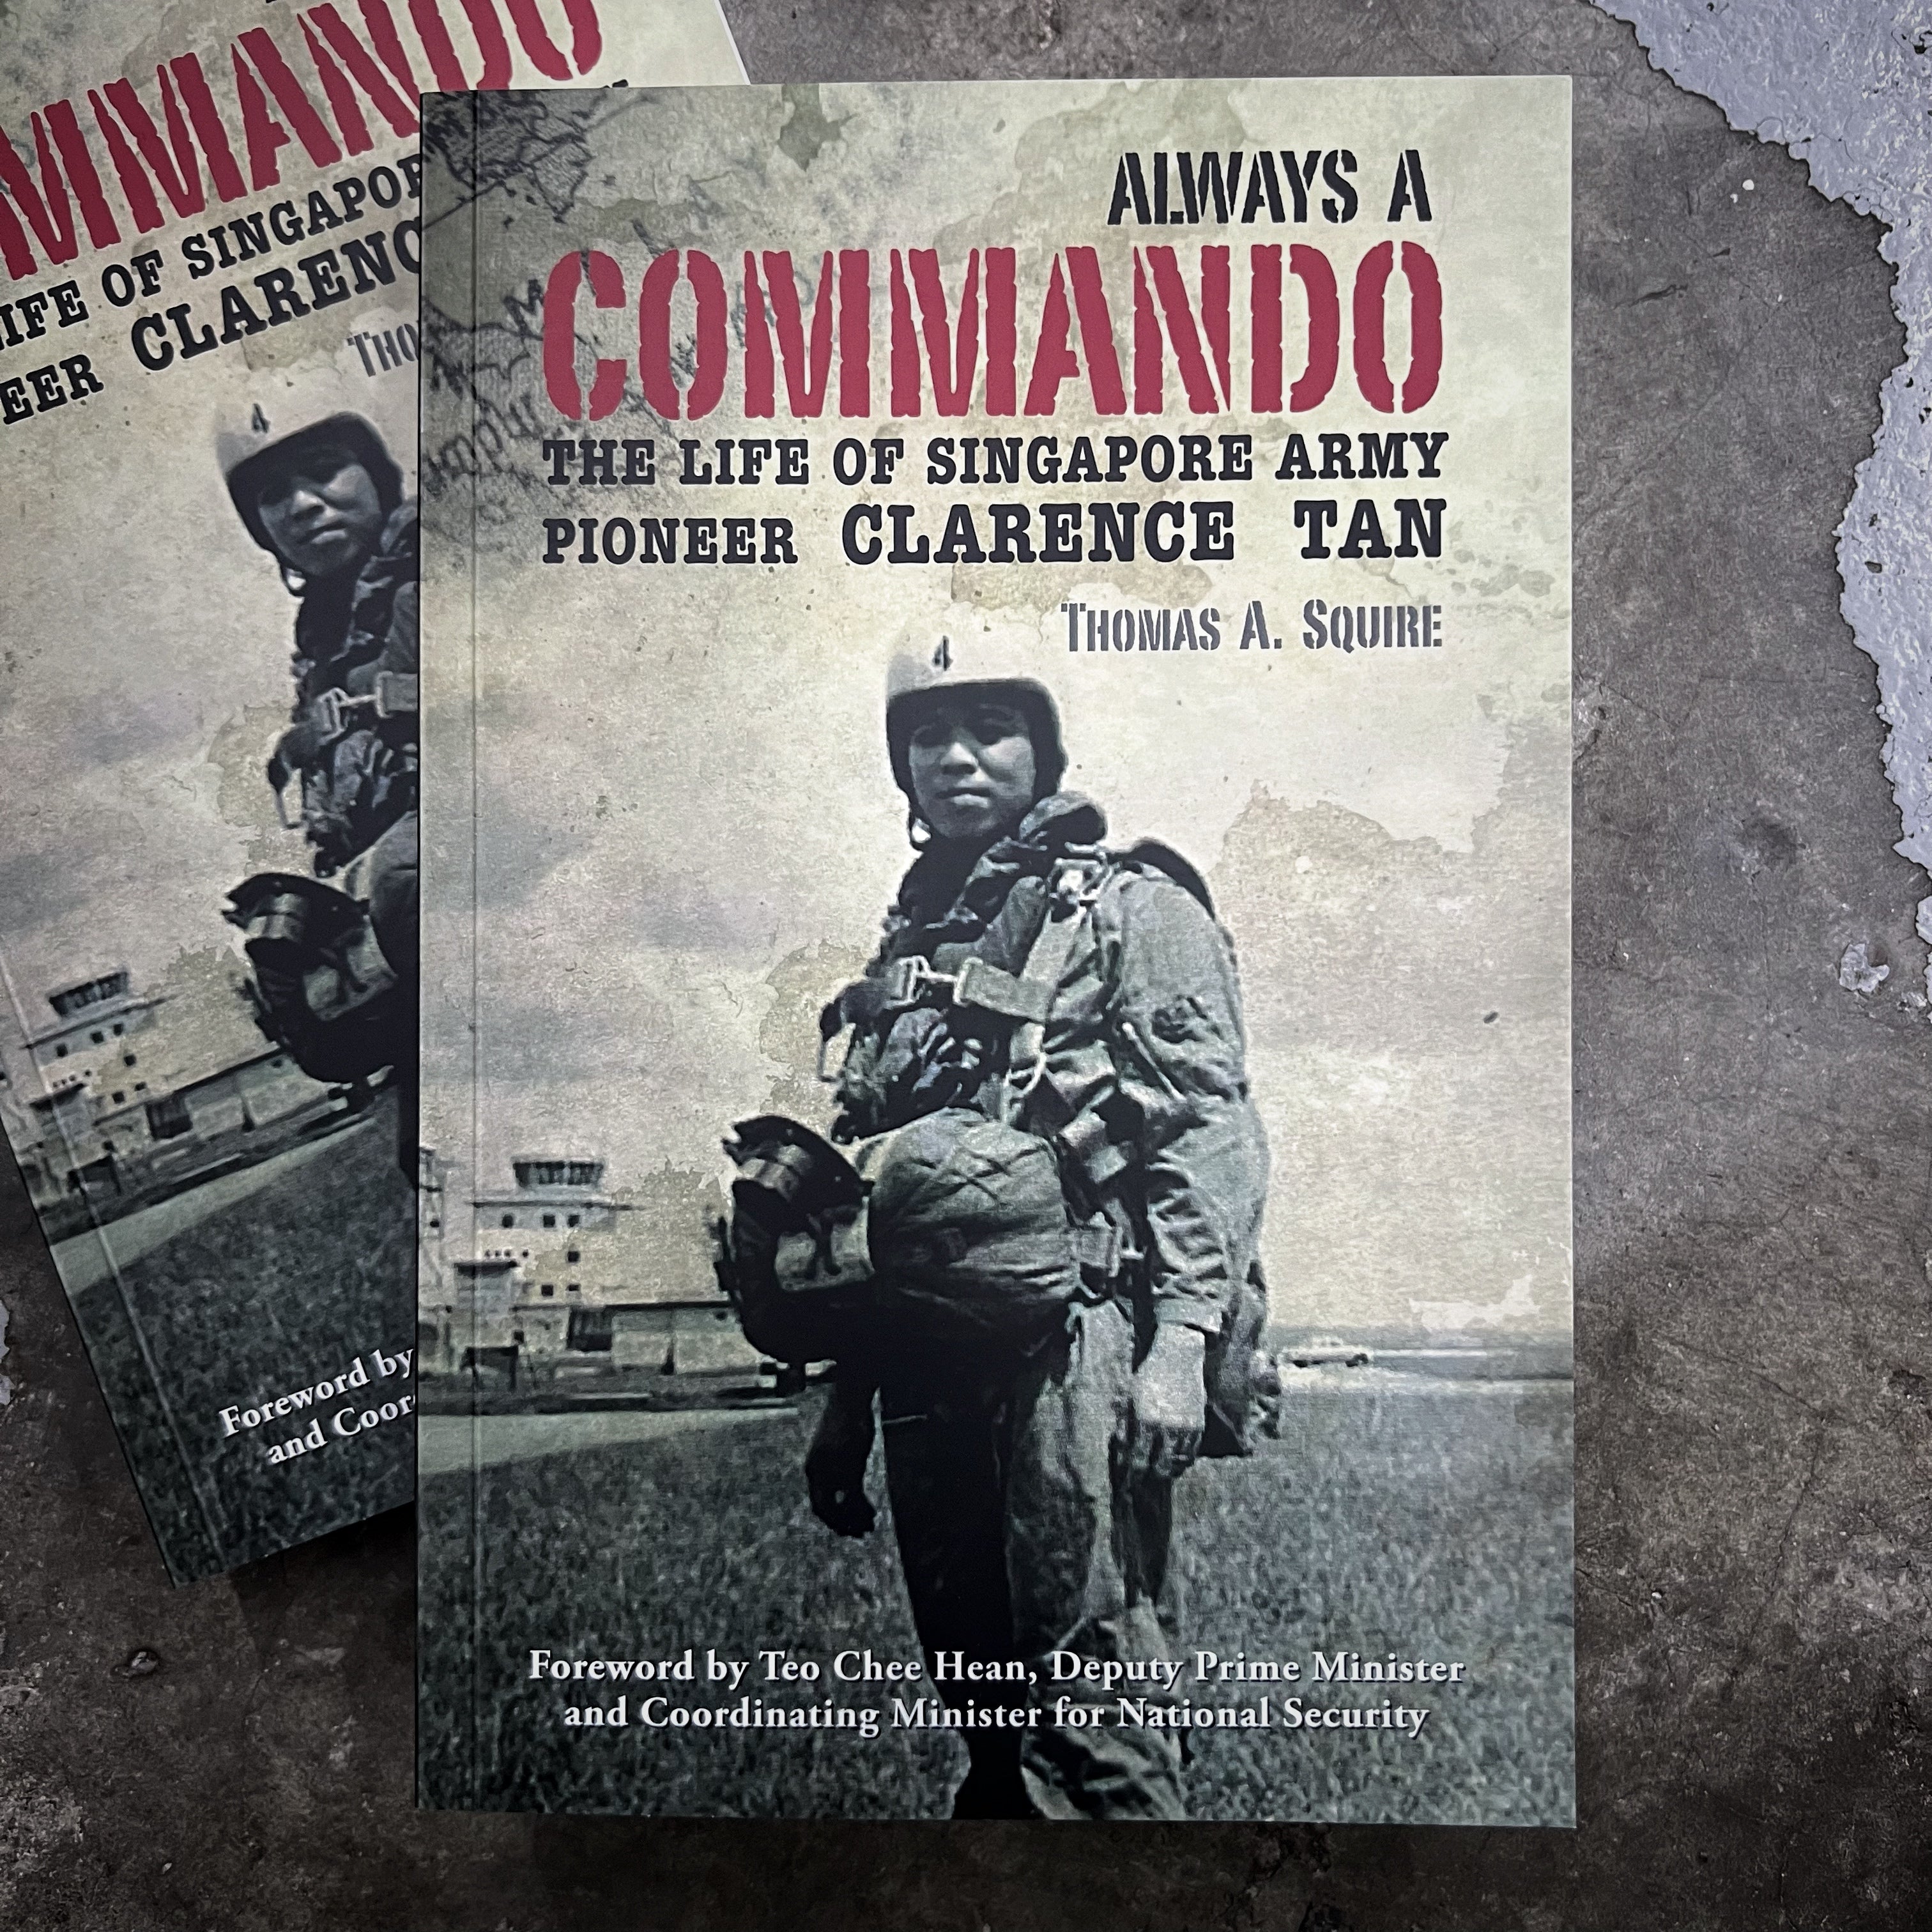 Always a Commando: The Life of Singapore Army Pioneer Clarence Tan Book (Autographed)